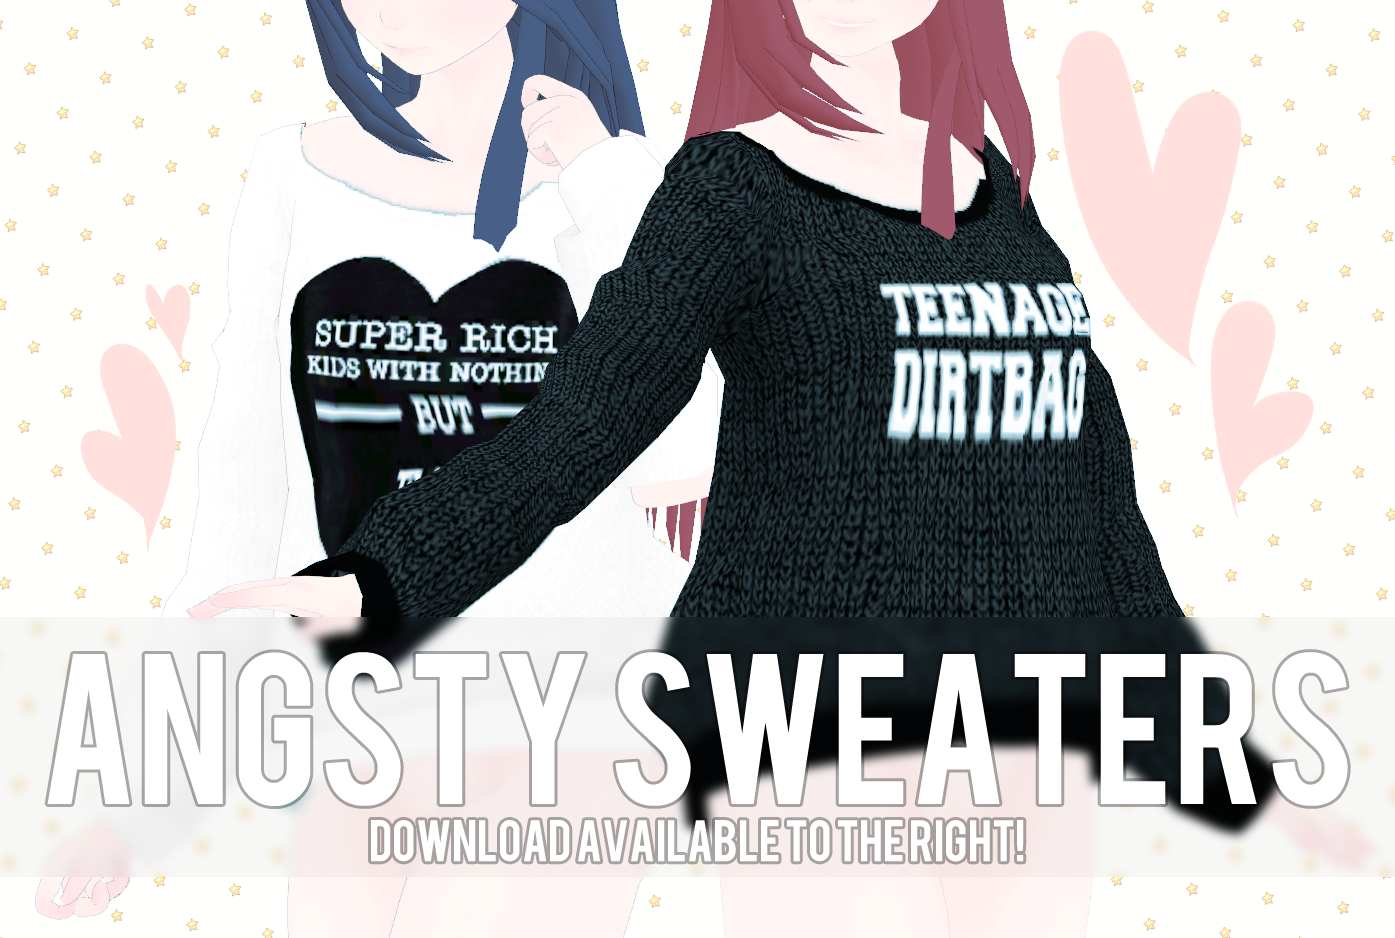 angsty sweaters // dl!!